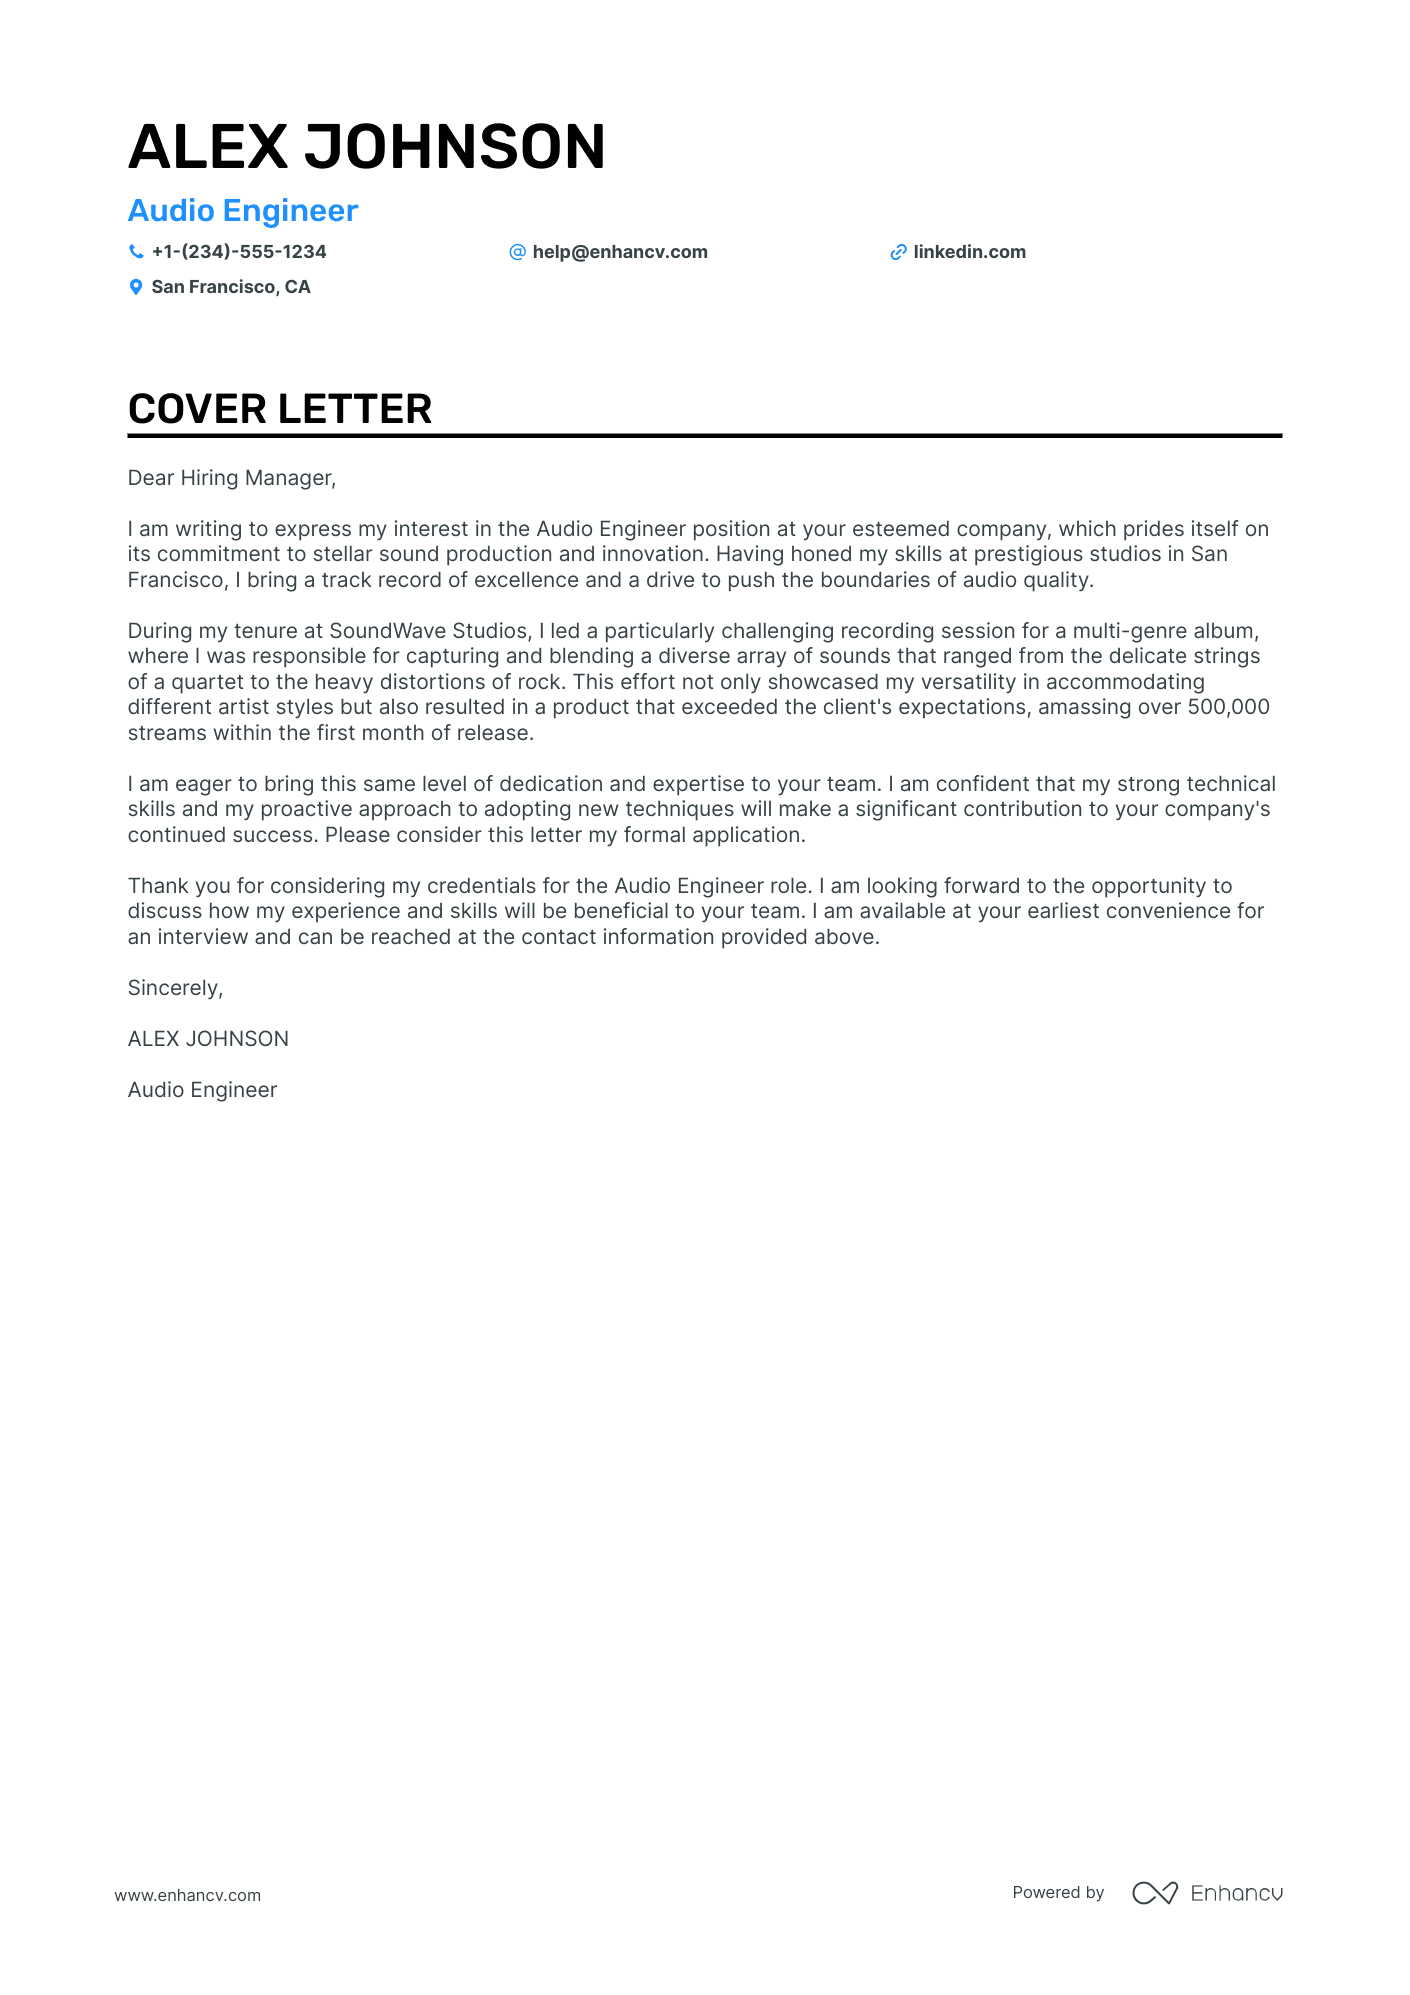 job application letter as a engineer